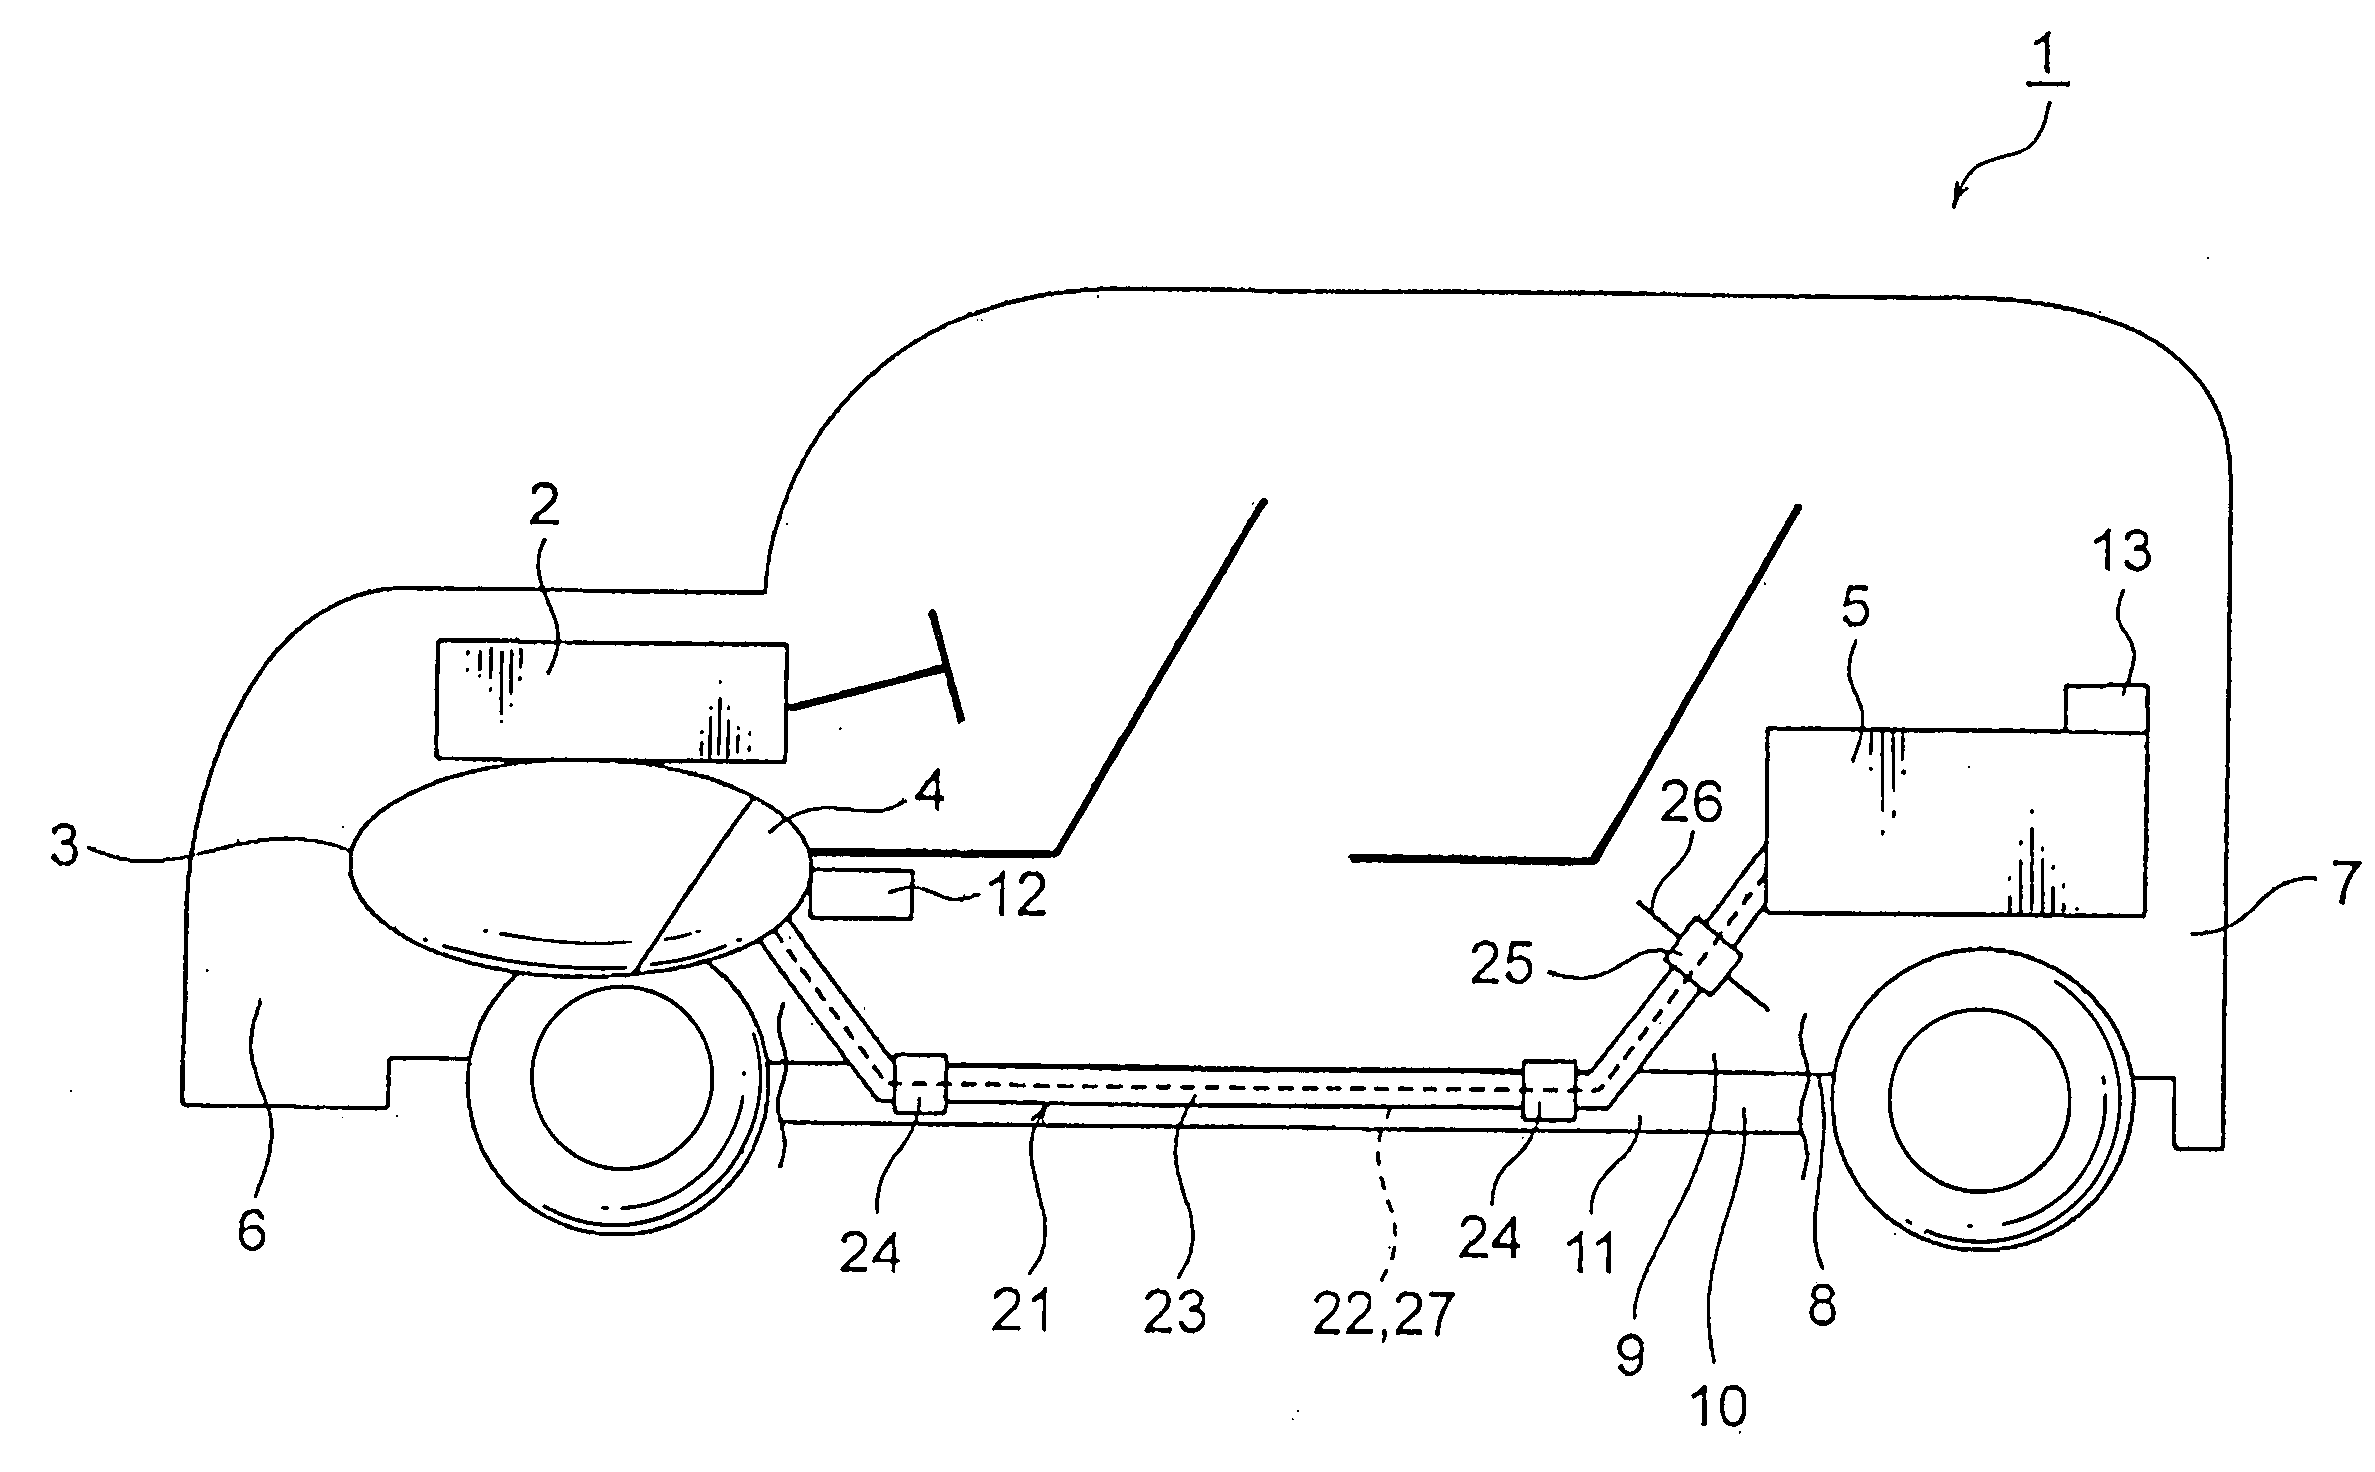 Method for producing wiring harness